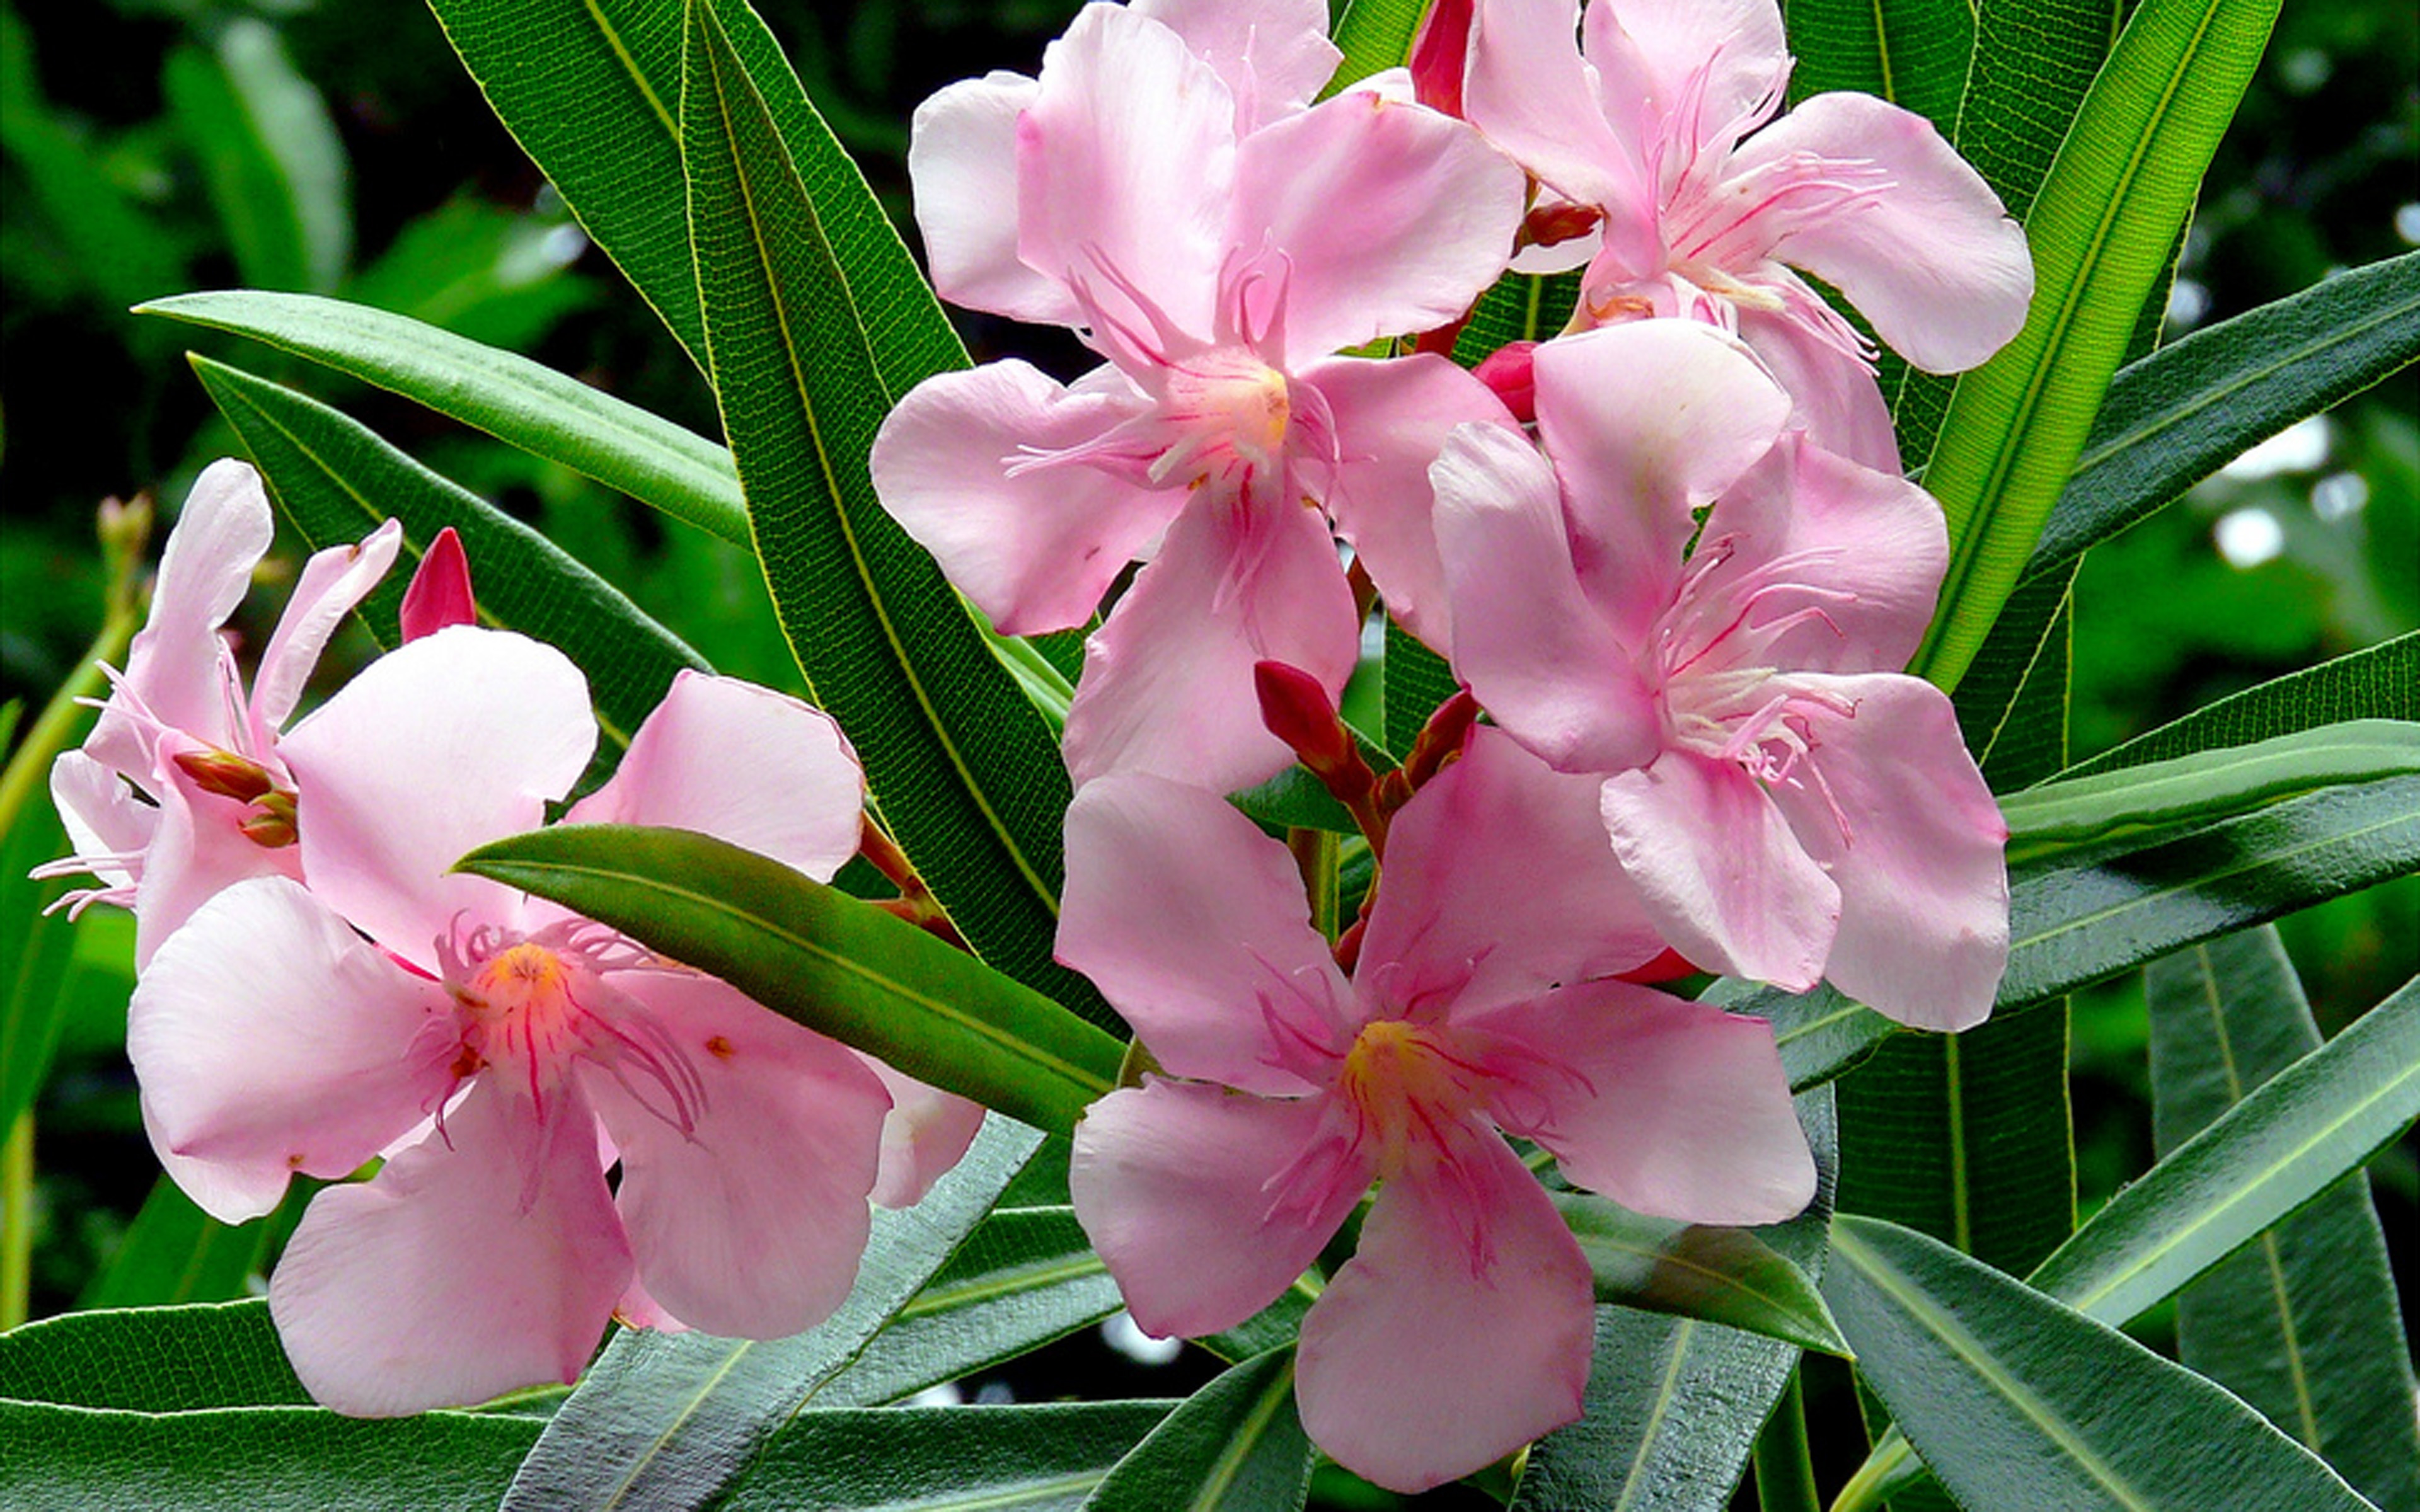 Nerium Oleander Pink Flowers With Green Leaves Toxic Plants Bush Tree